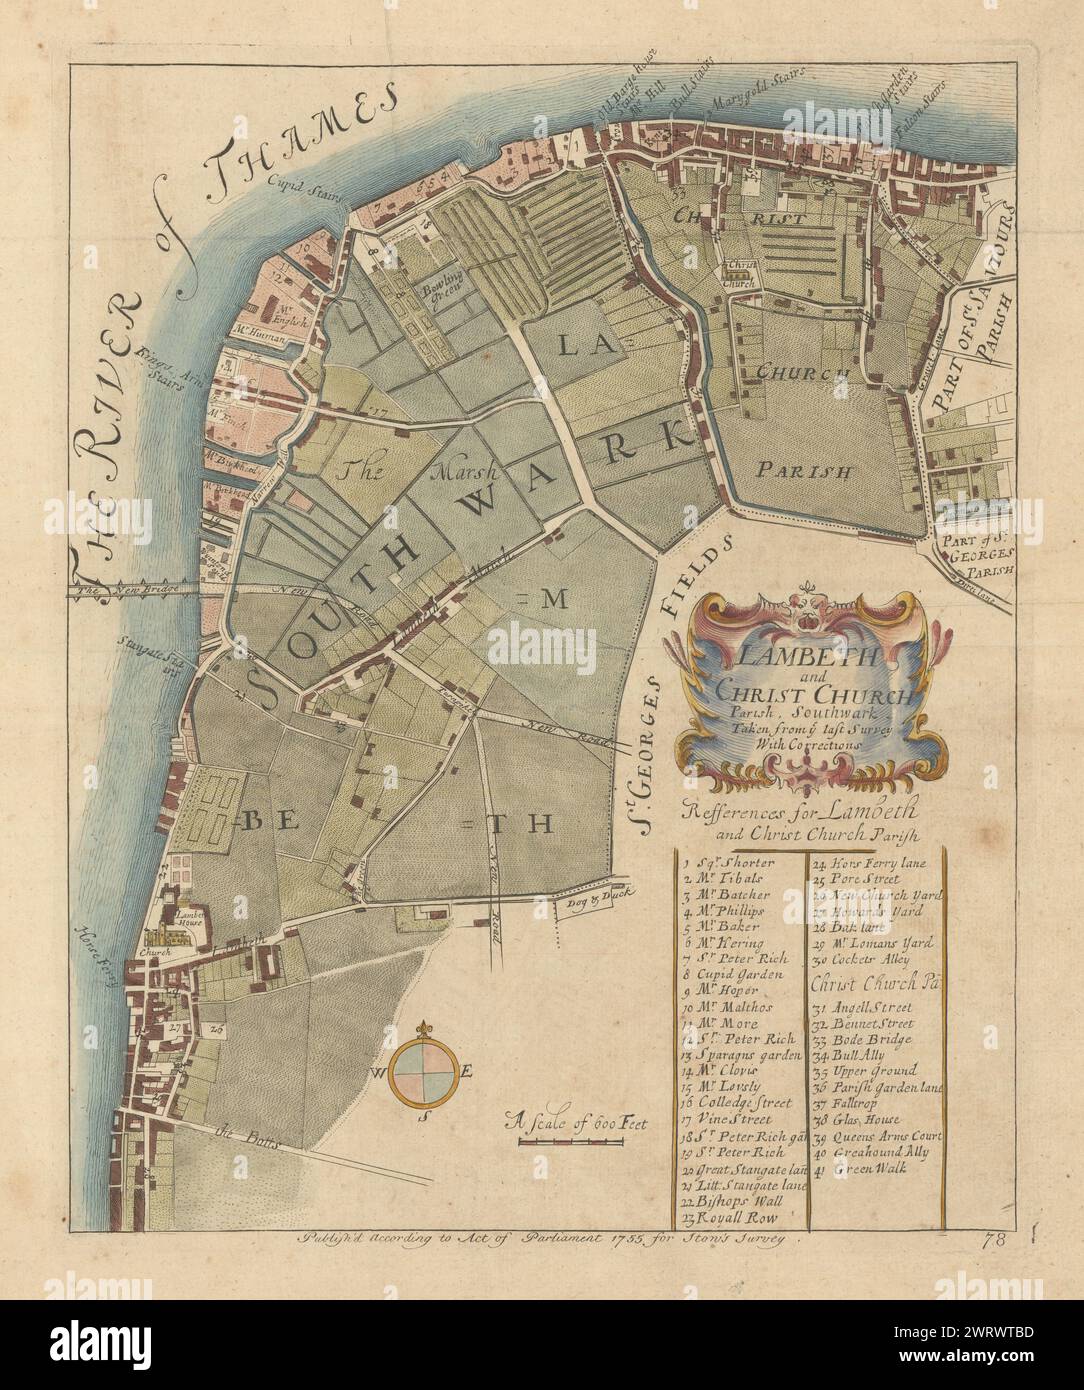 'Lambeth and Christ Church parish, Southwark'. Bankside. STOW/STRYPE 1755 map Stock Photo